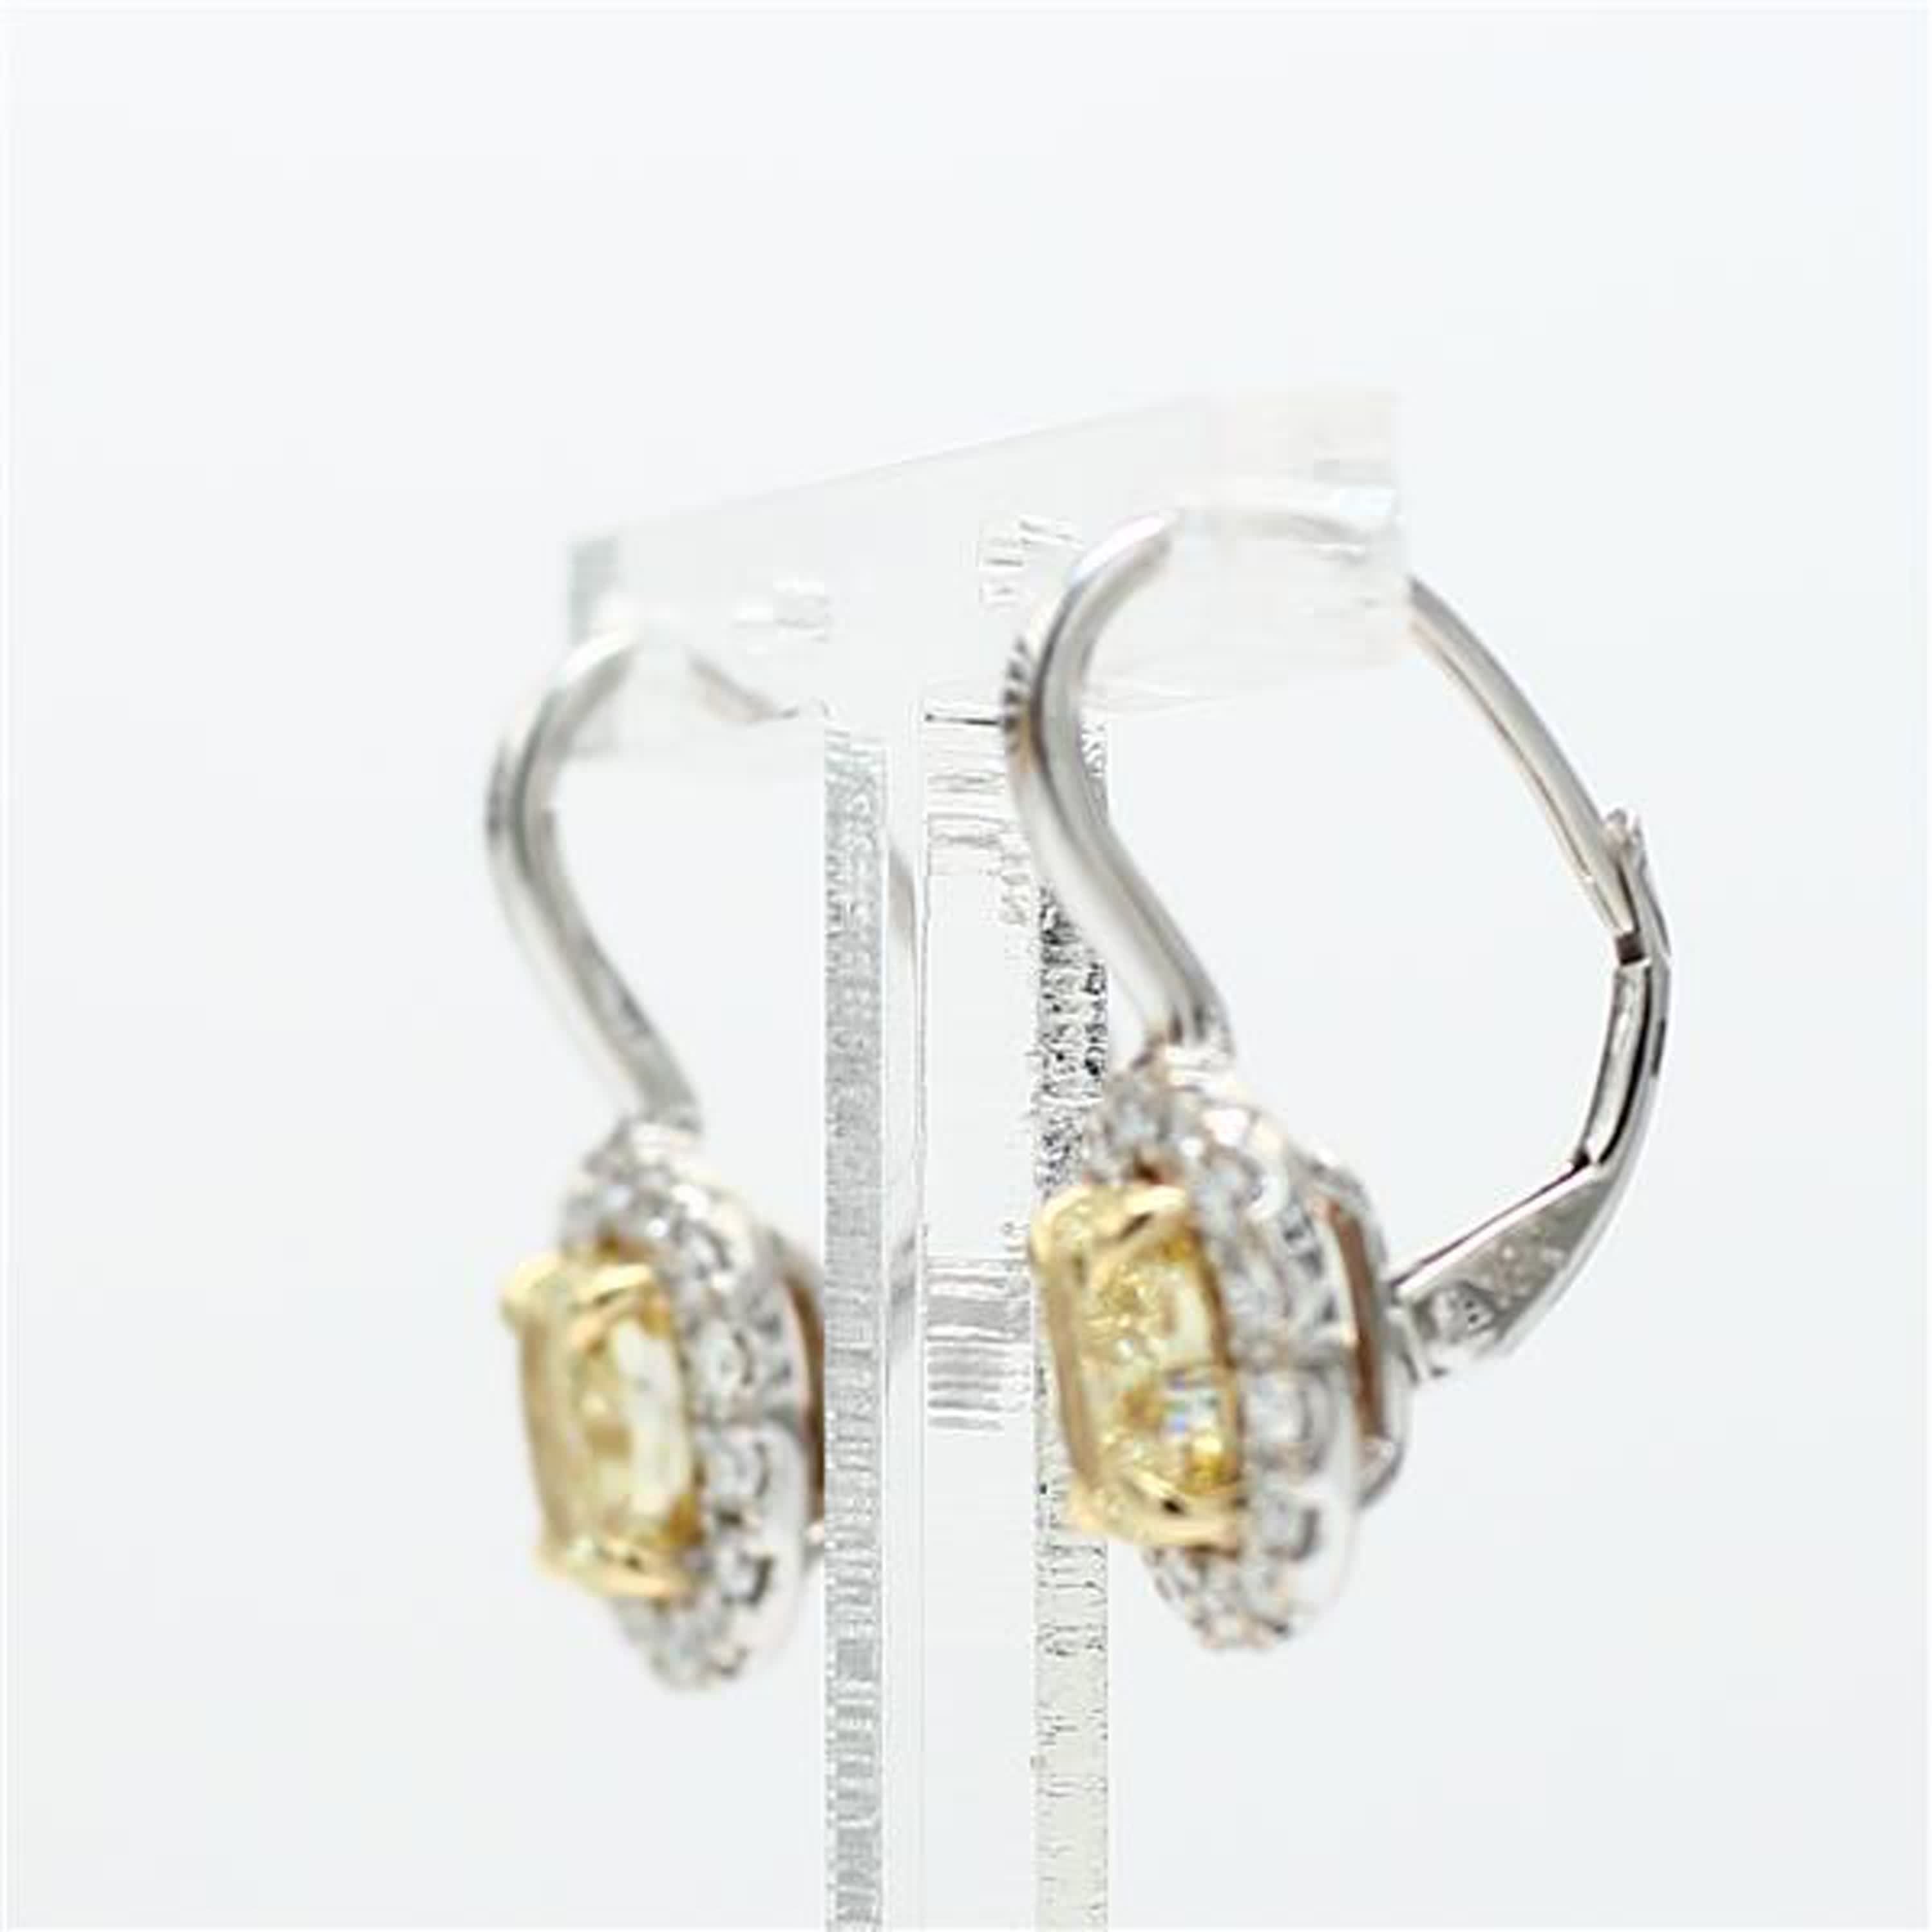 Natural Yellow Oval and White Diamond 1.92 Carat TW Gold Drop Earrings